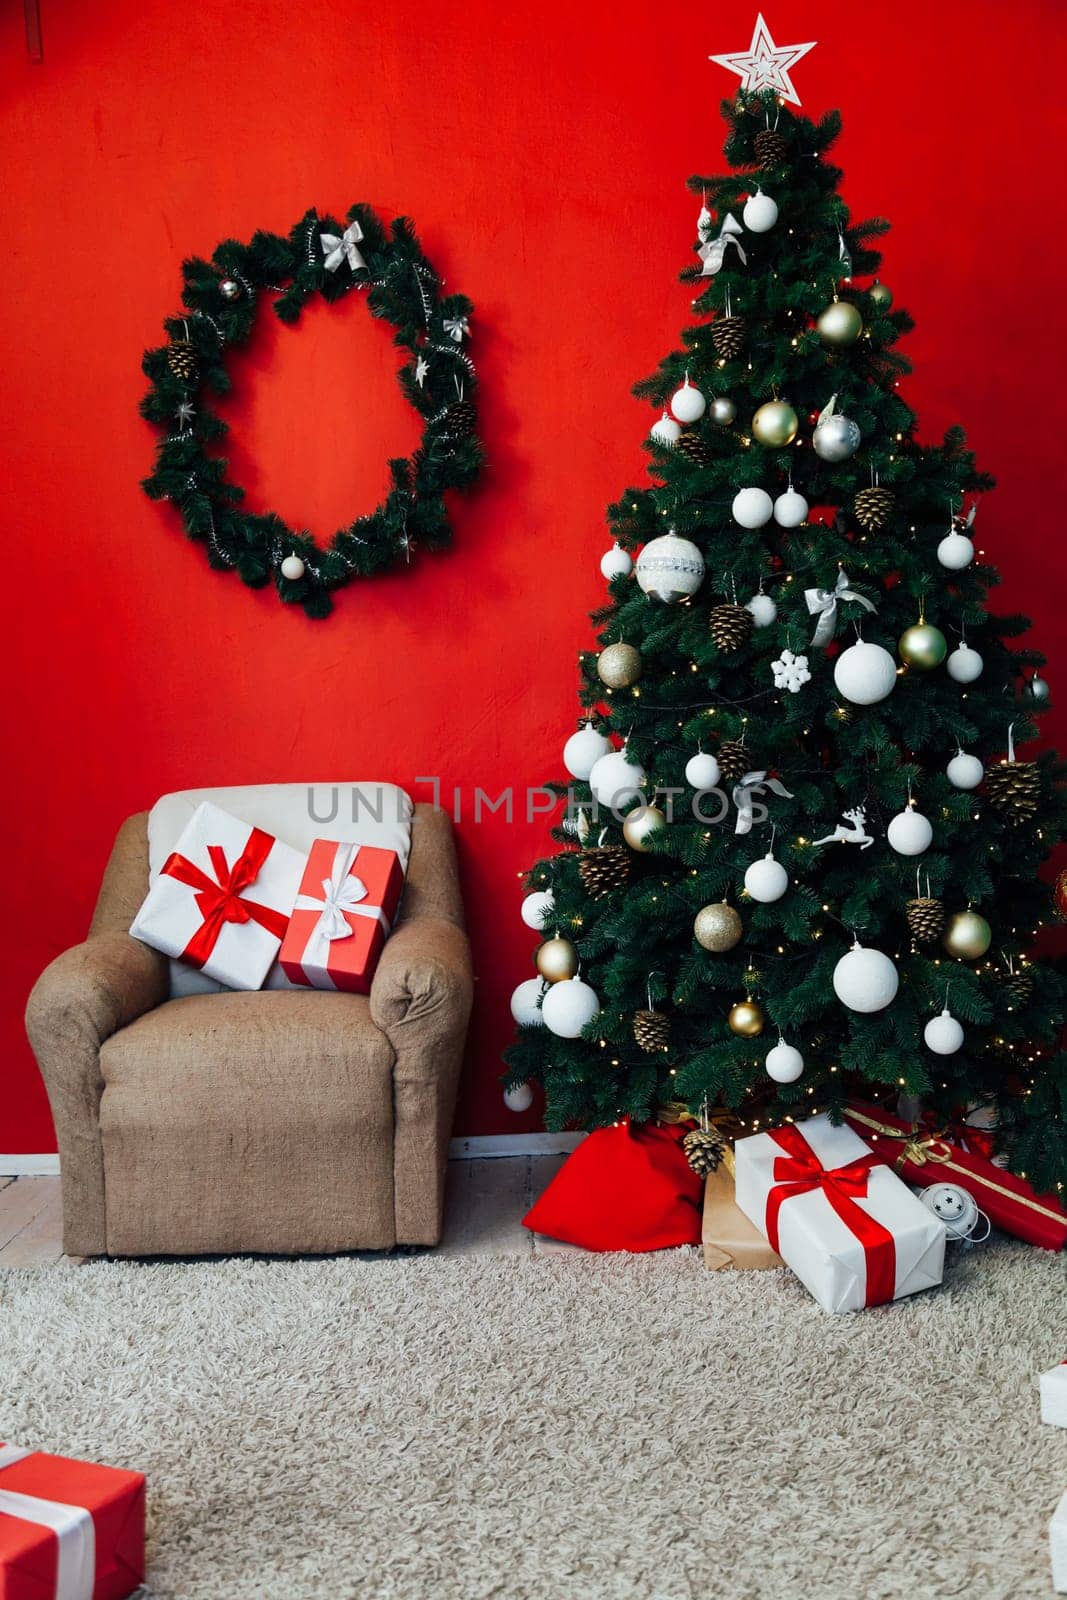 Christmas tree with gifts in the interior of the red room decor for the new year